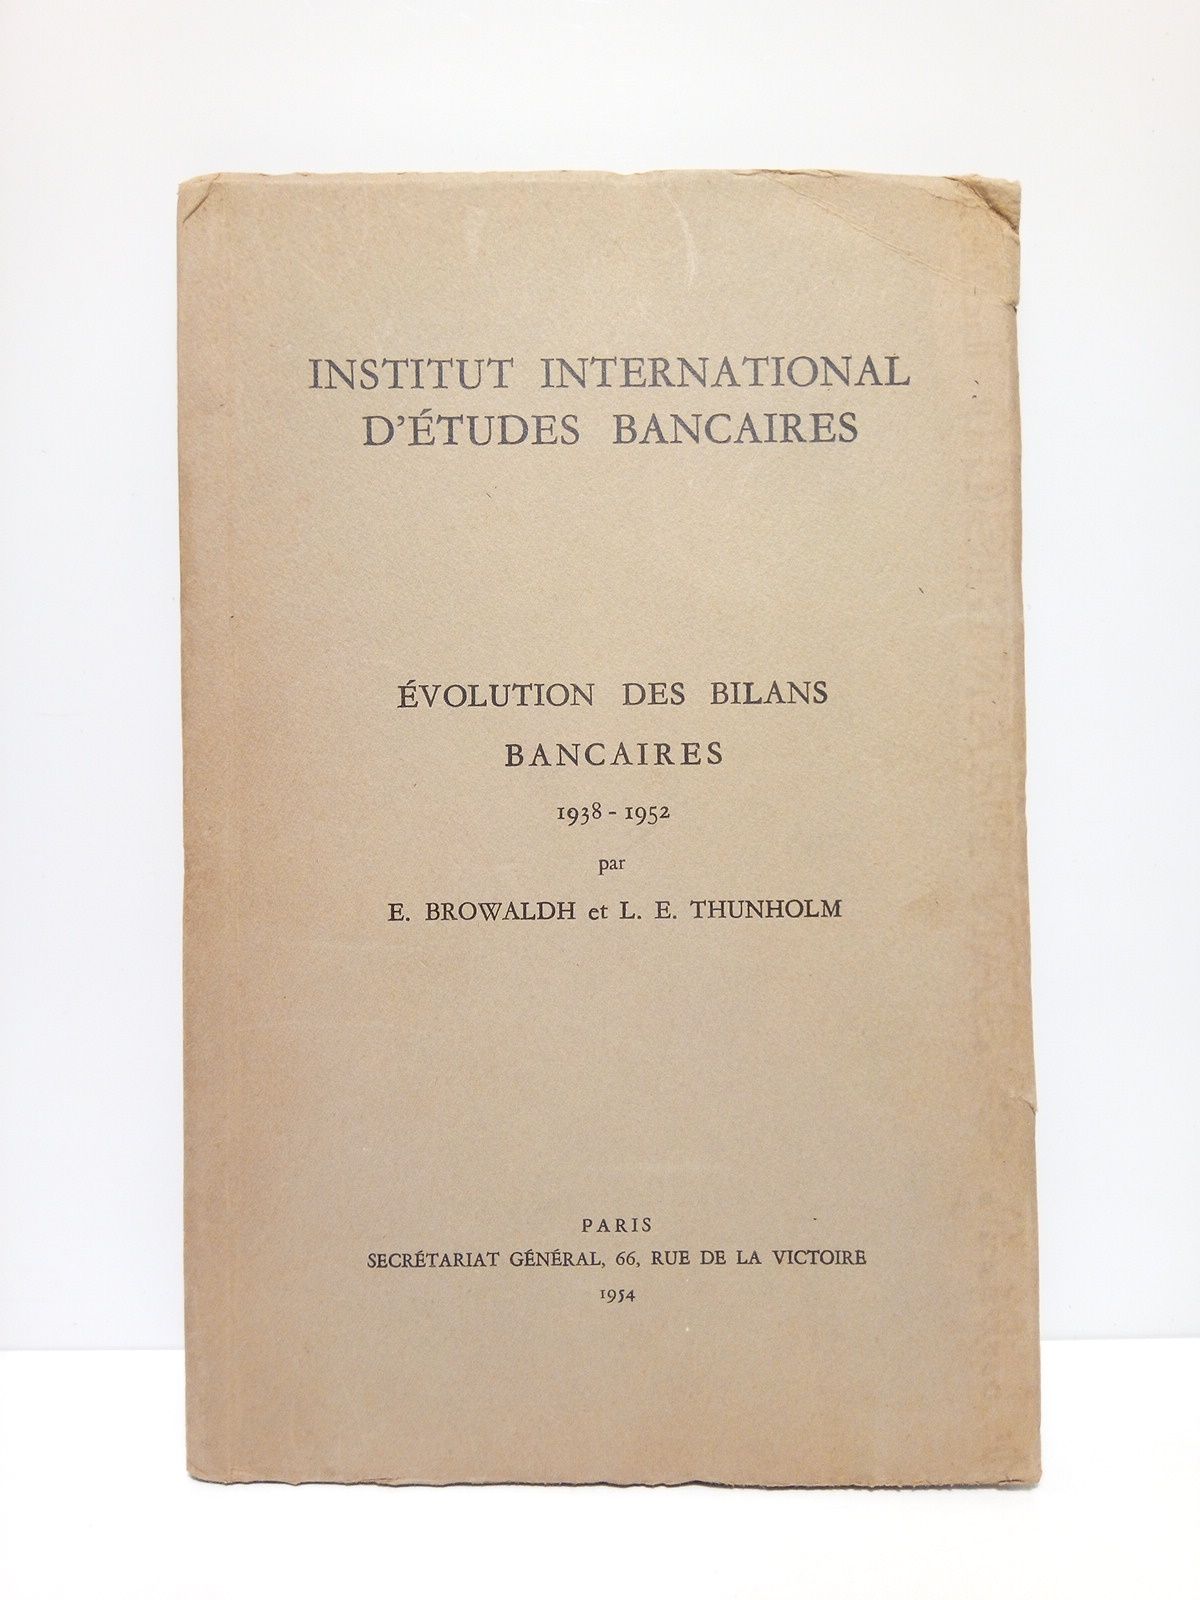 BROWALDH, E. and L. E. Thunholm - Institut International d'Etudes Bancaires: Changes in bank balance sheets. 1938 - 1952